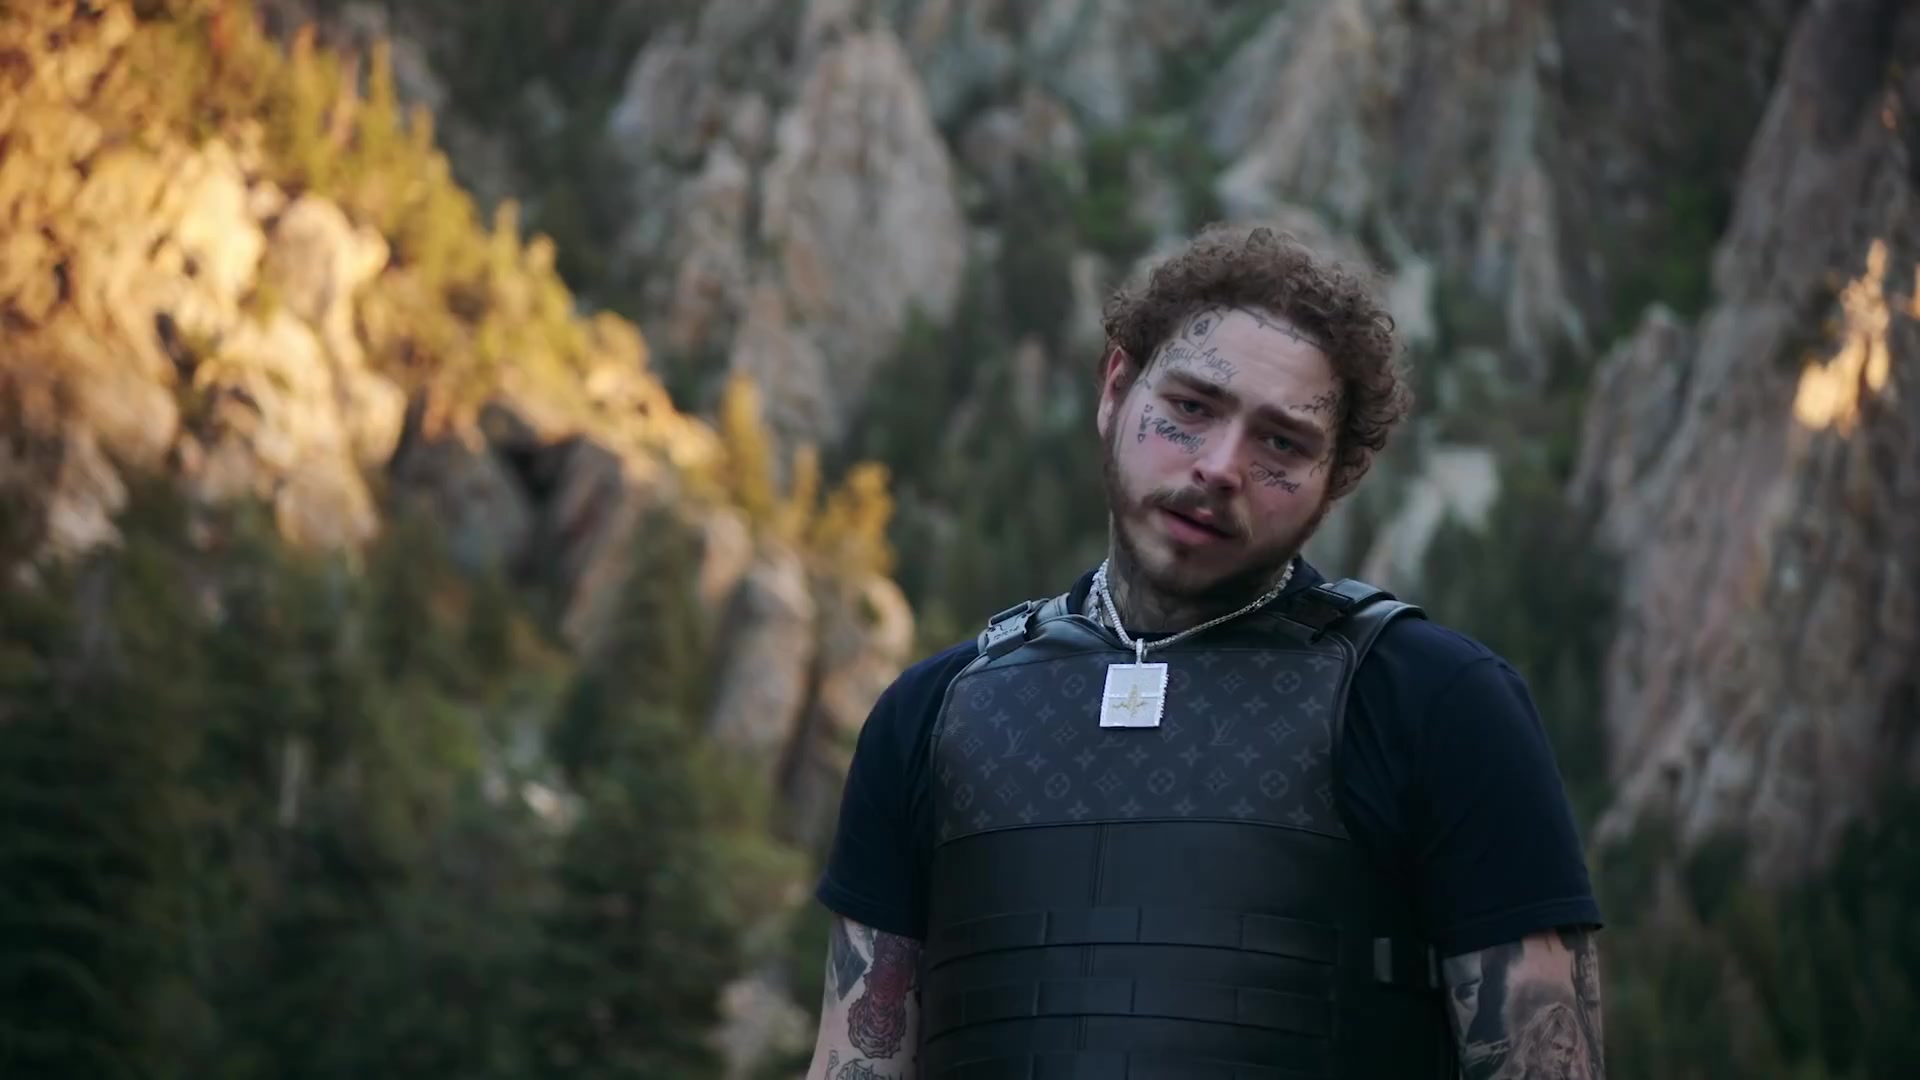 Innocent Armor - Post Malone was shown wearing a Louis Vuitton